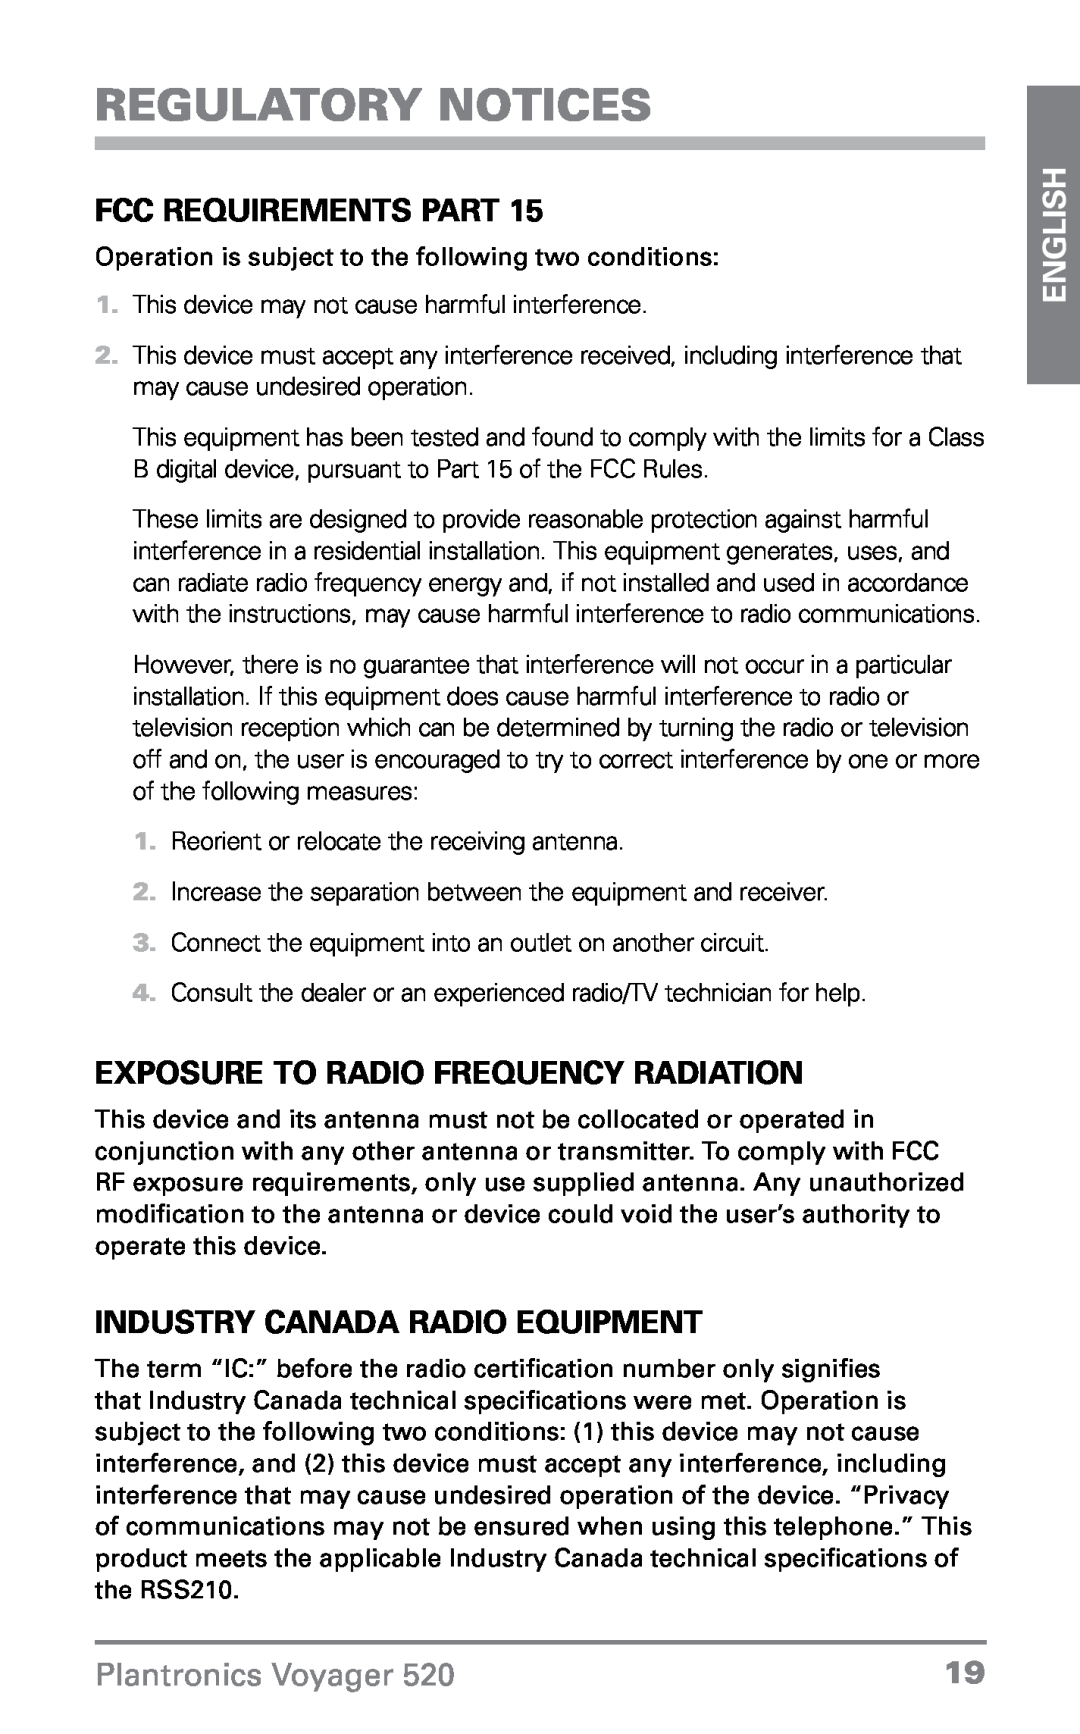 Plantronics 520 manual Regulatory Notices, FCC Requirements Part, Exposure To Radio Frequency Radiation, English 